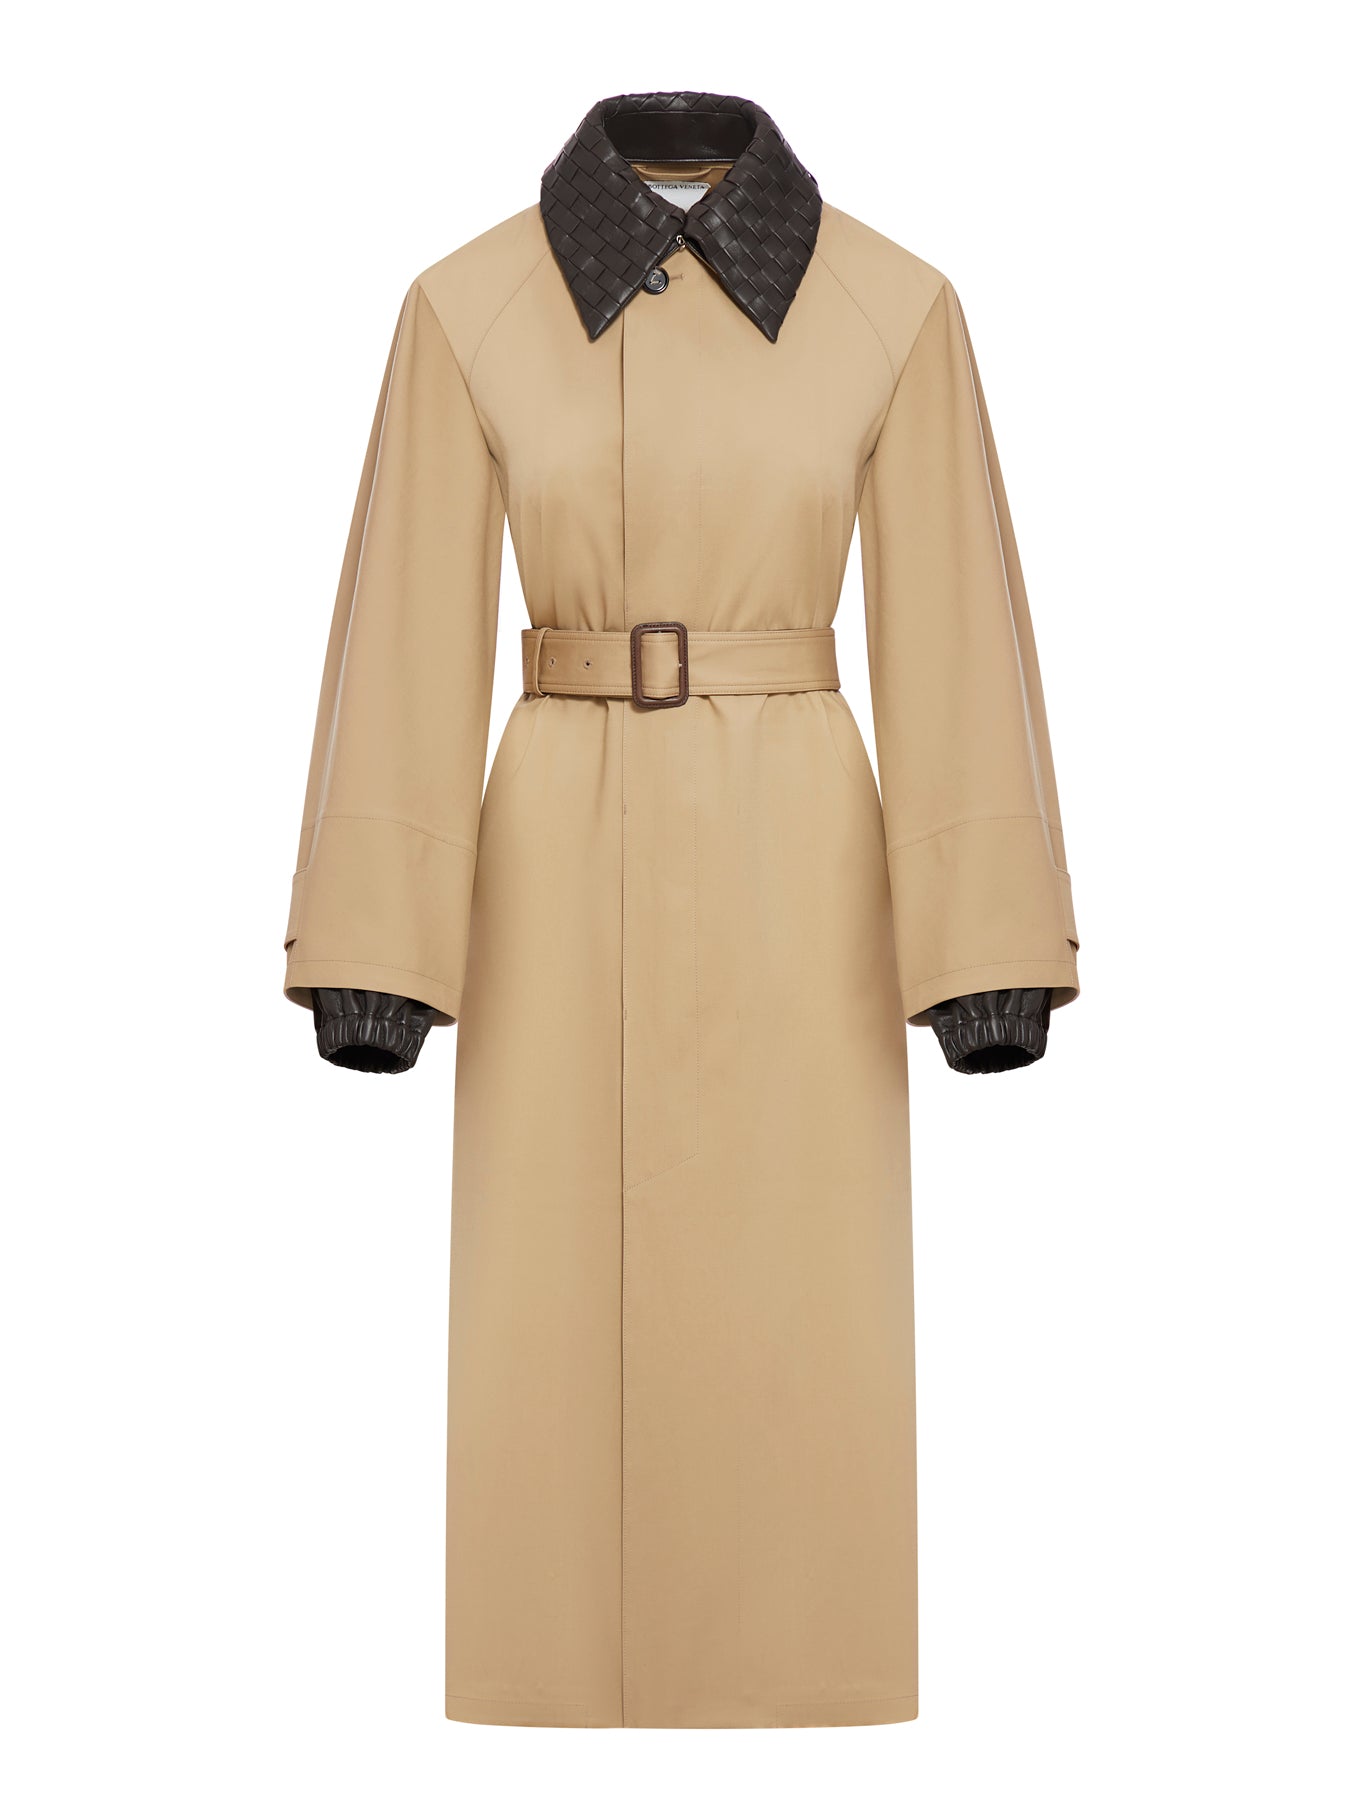 Cotton trench coat with braided collar